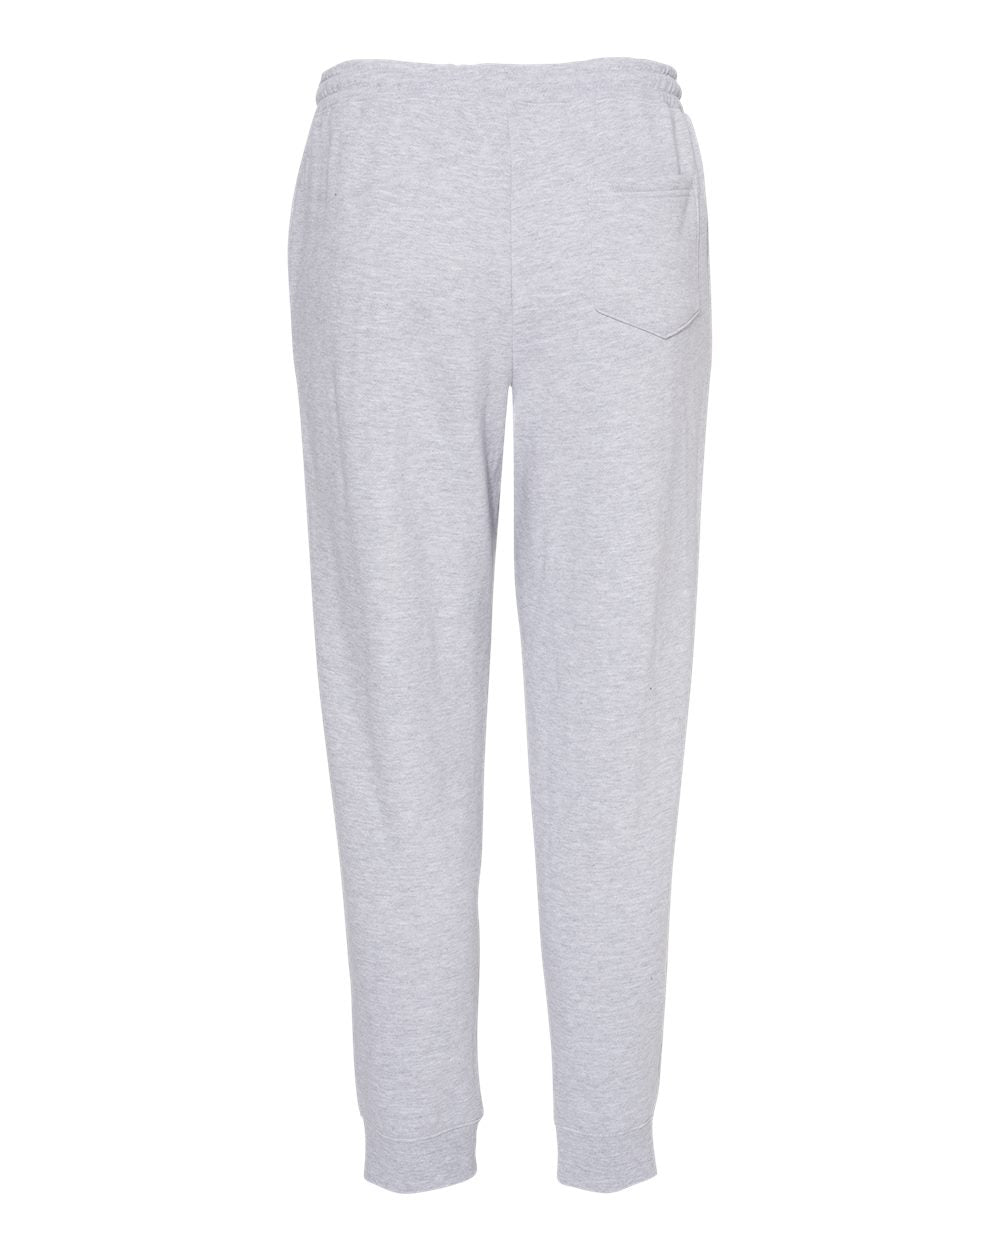 The Squire Men's Midweight Joggers